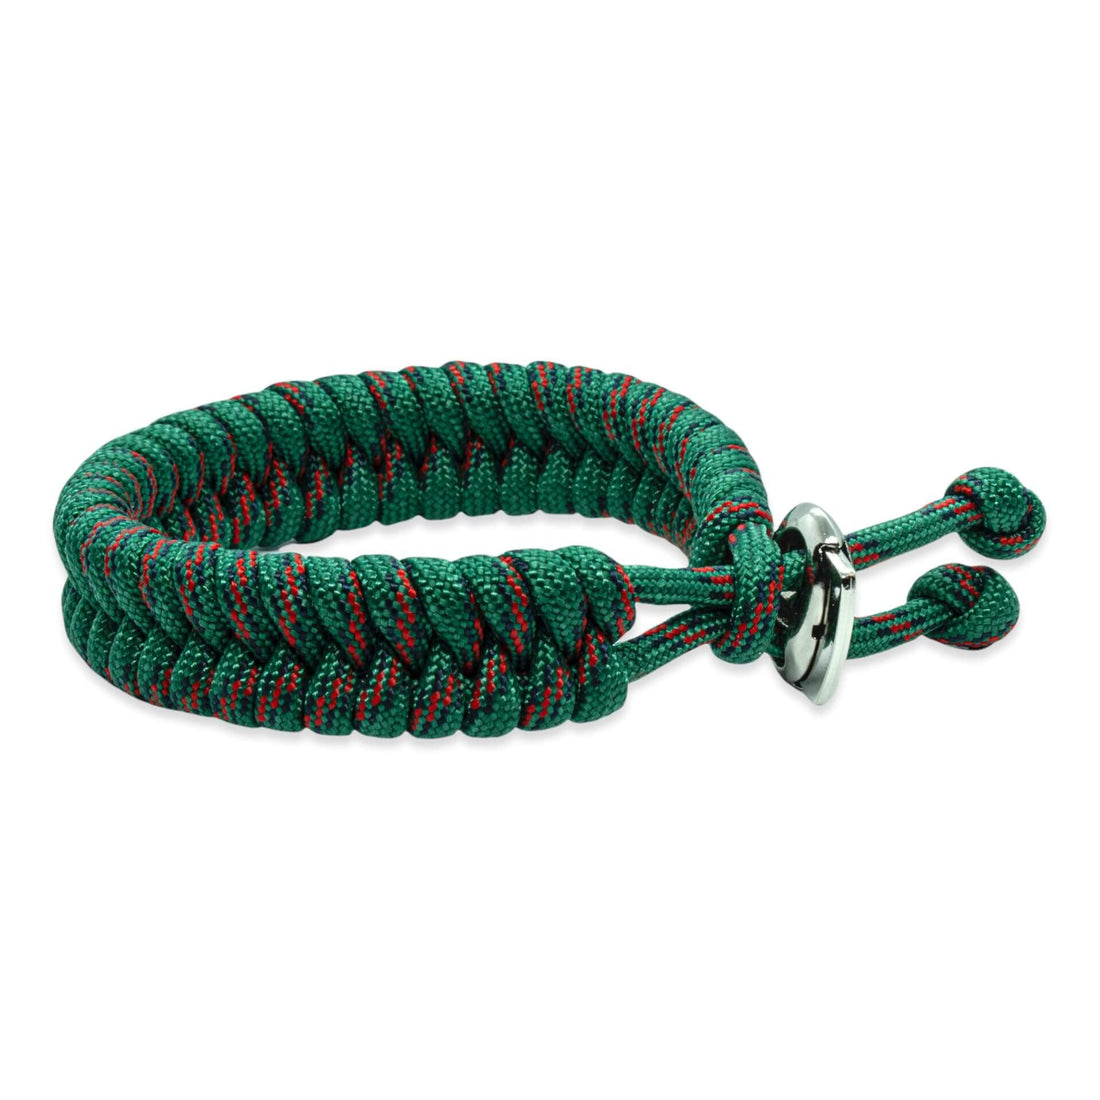 Swedish tail bracelet - Green black red rope colors